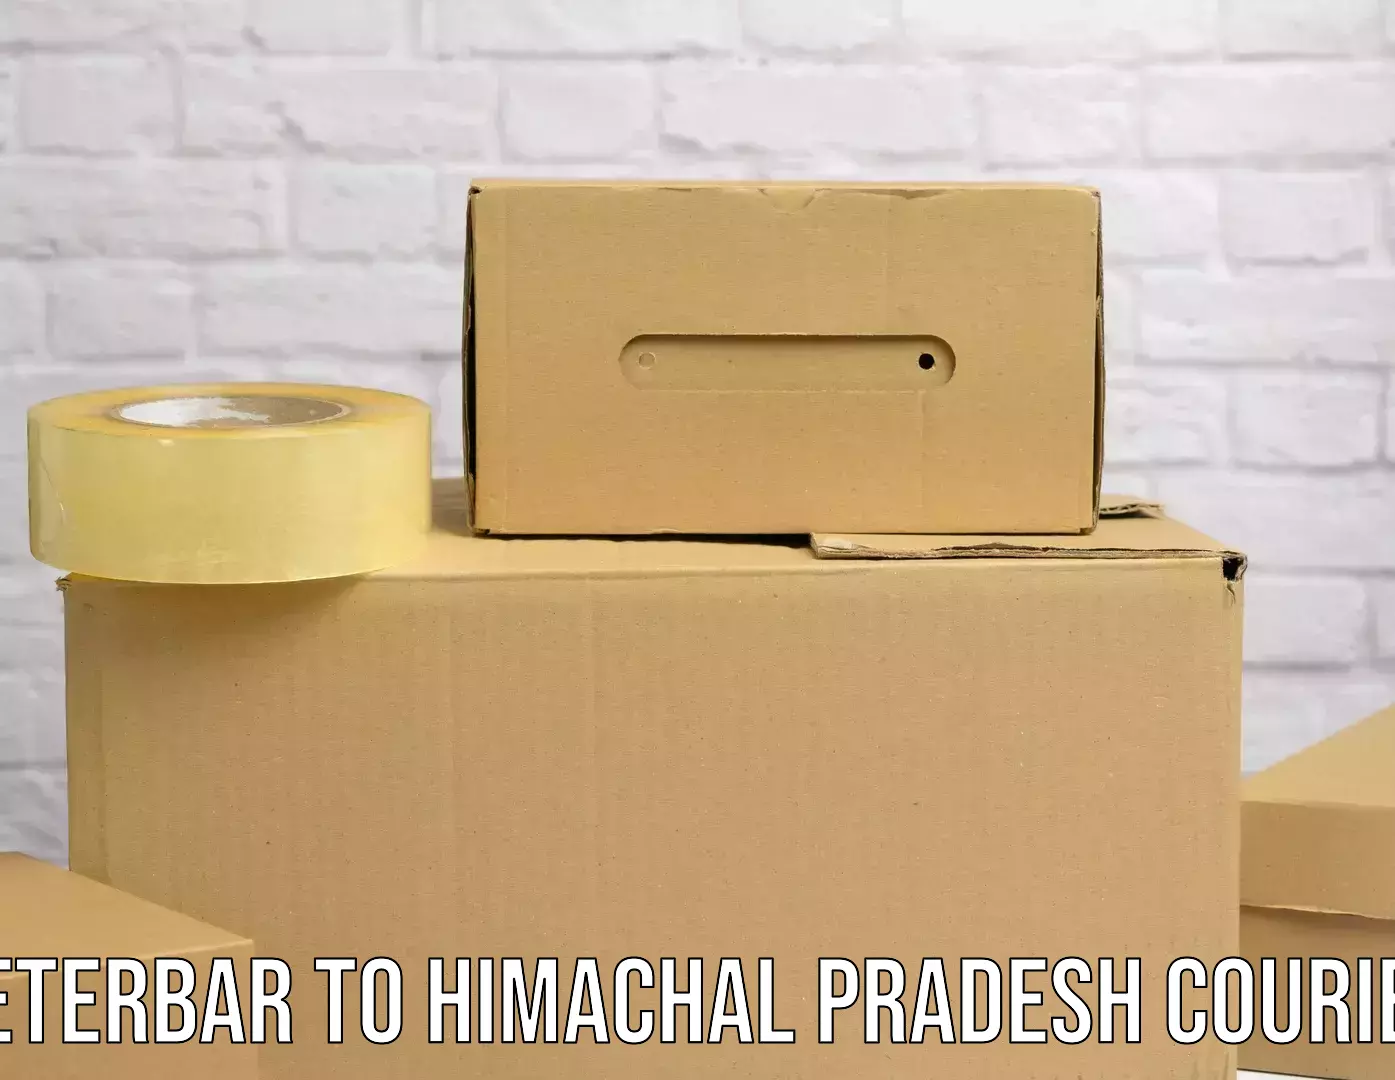 Courier service comparison in Peterbar to Himachal Pradesh